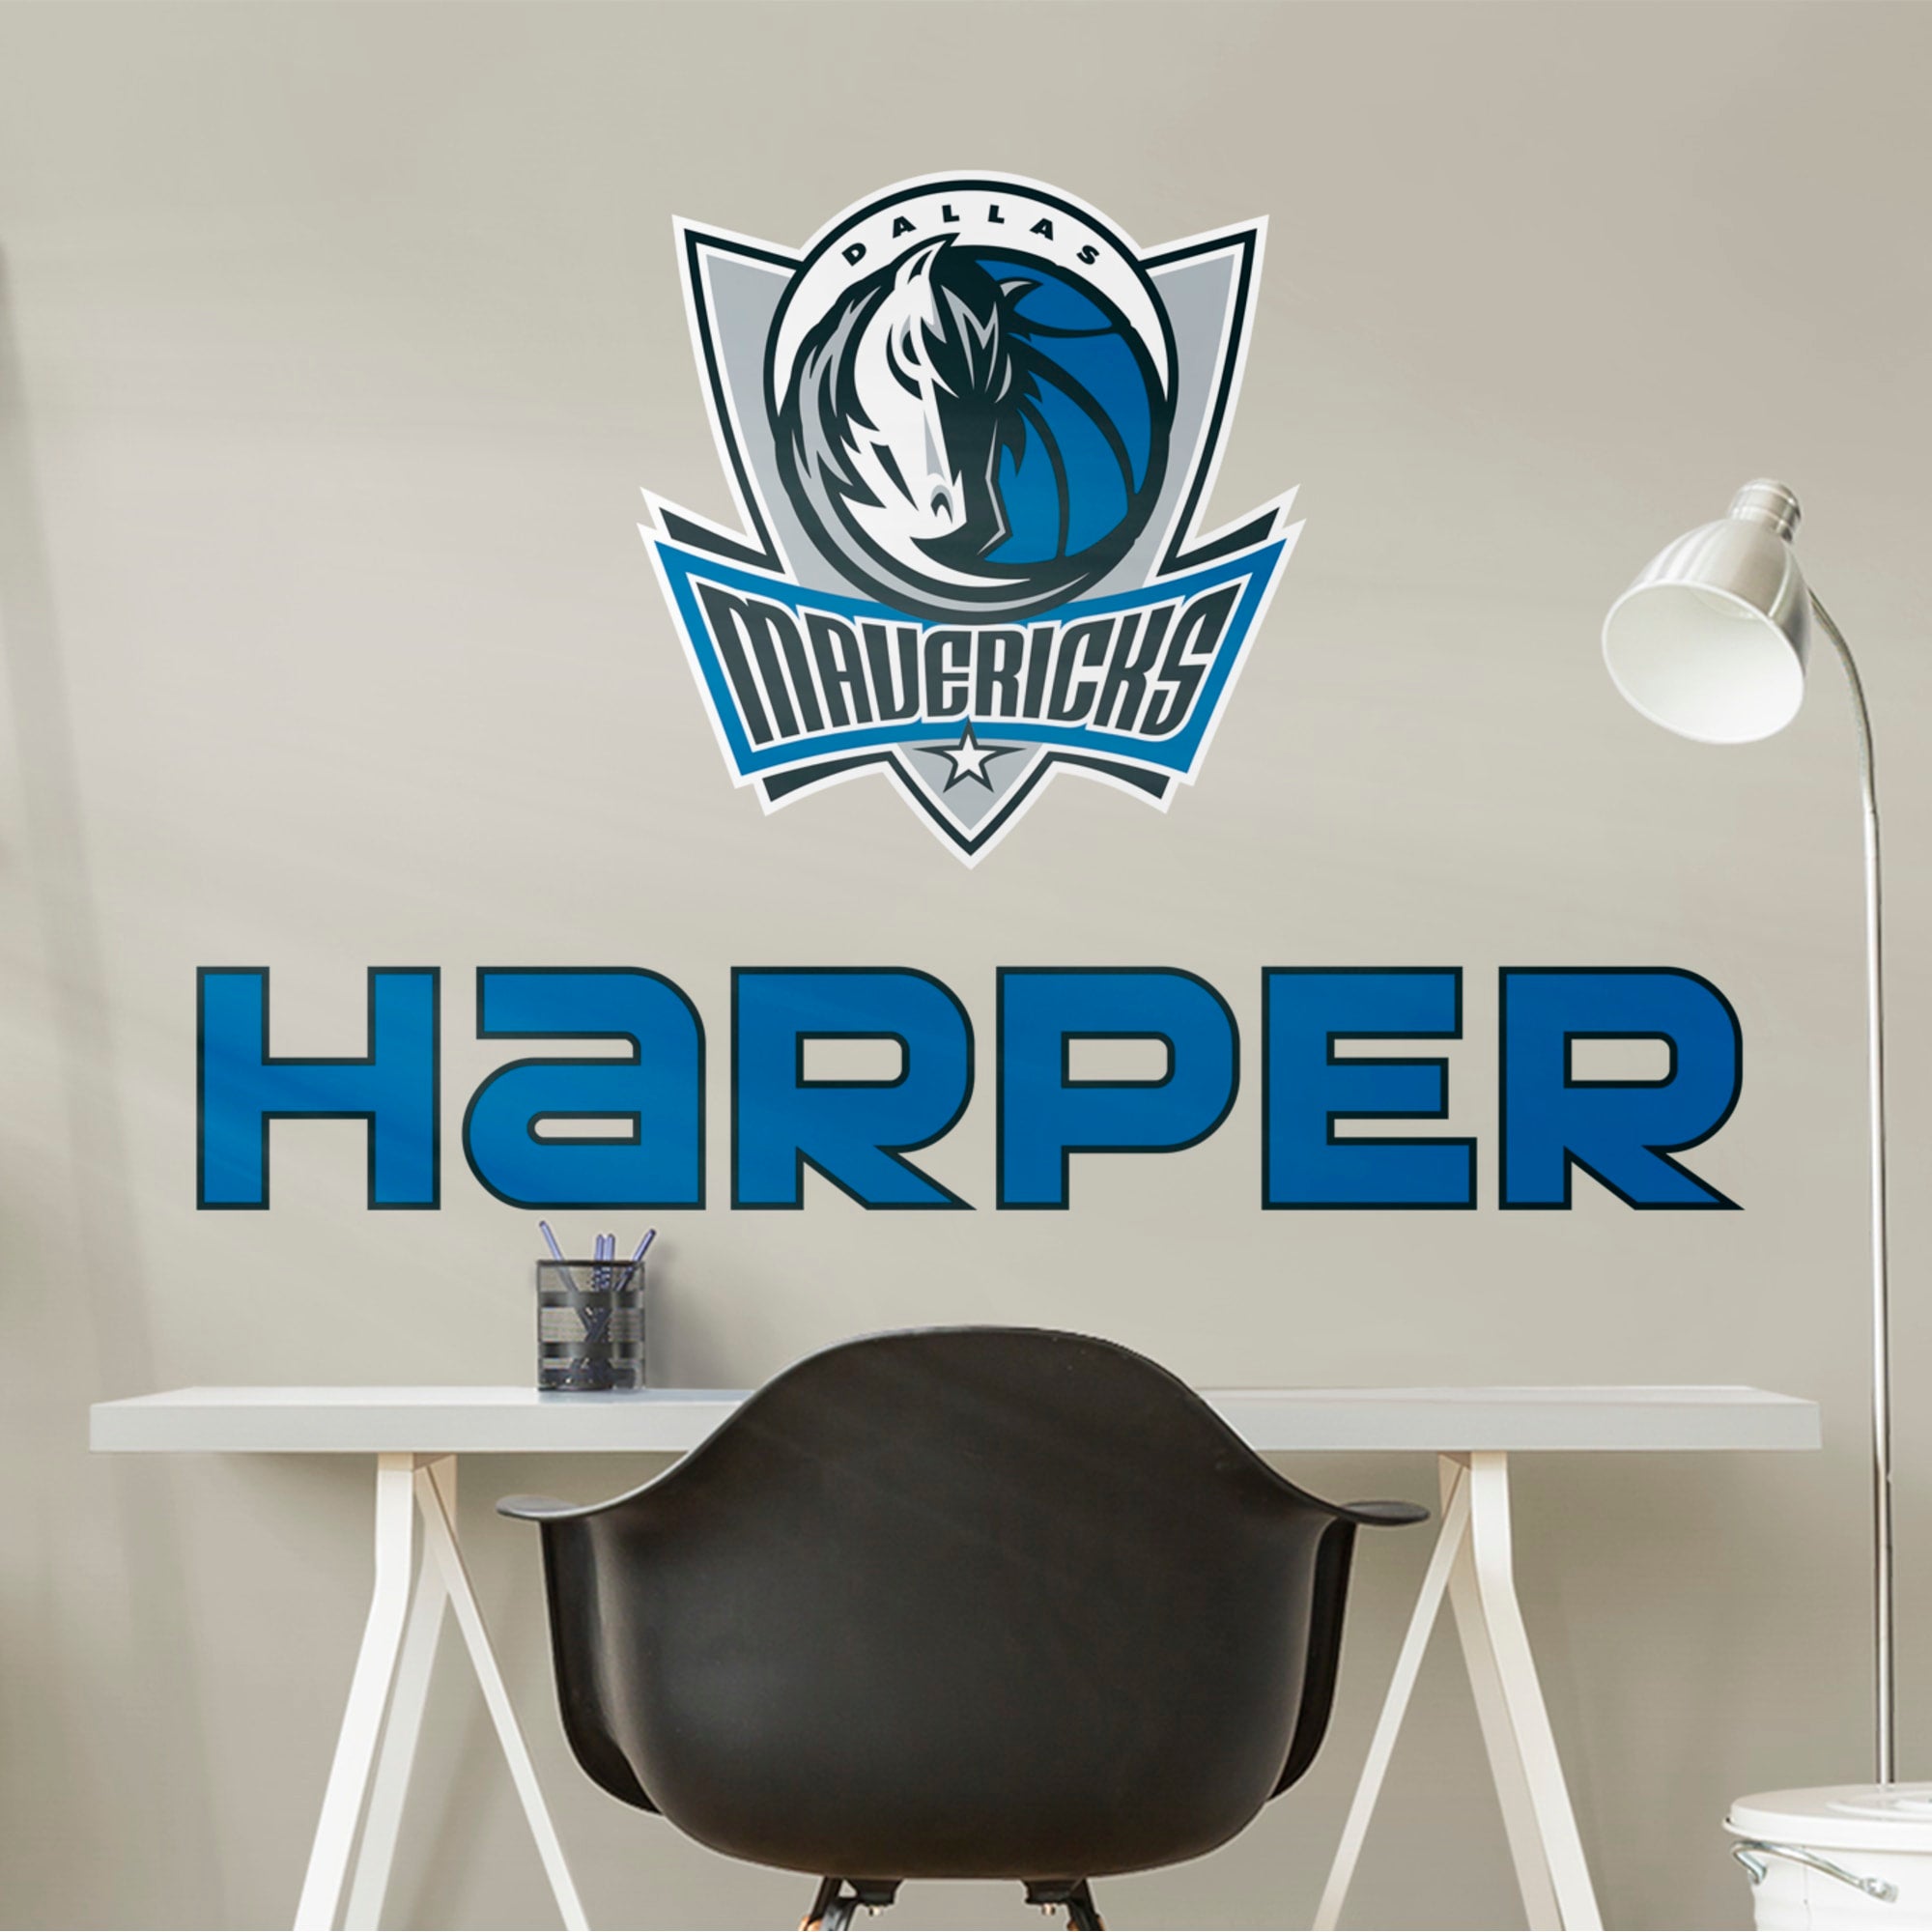 Dallas Mavericks: Stacked Personalized Name - Officially Licensed NBA Transfer Decal in Blue (39.5"W x 52"H) by Fathead | Vinyl